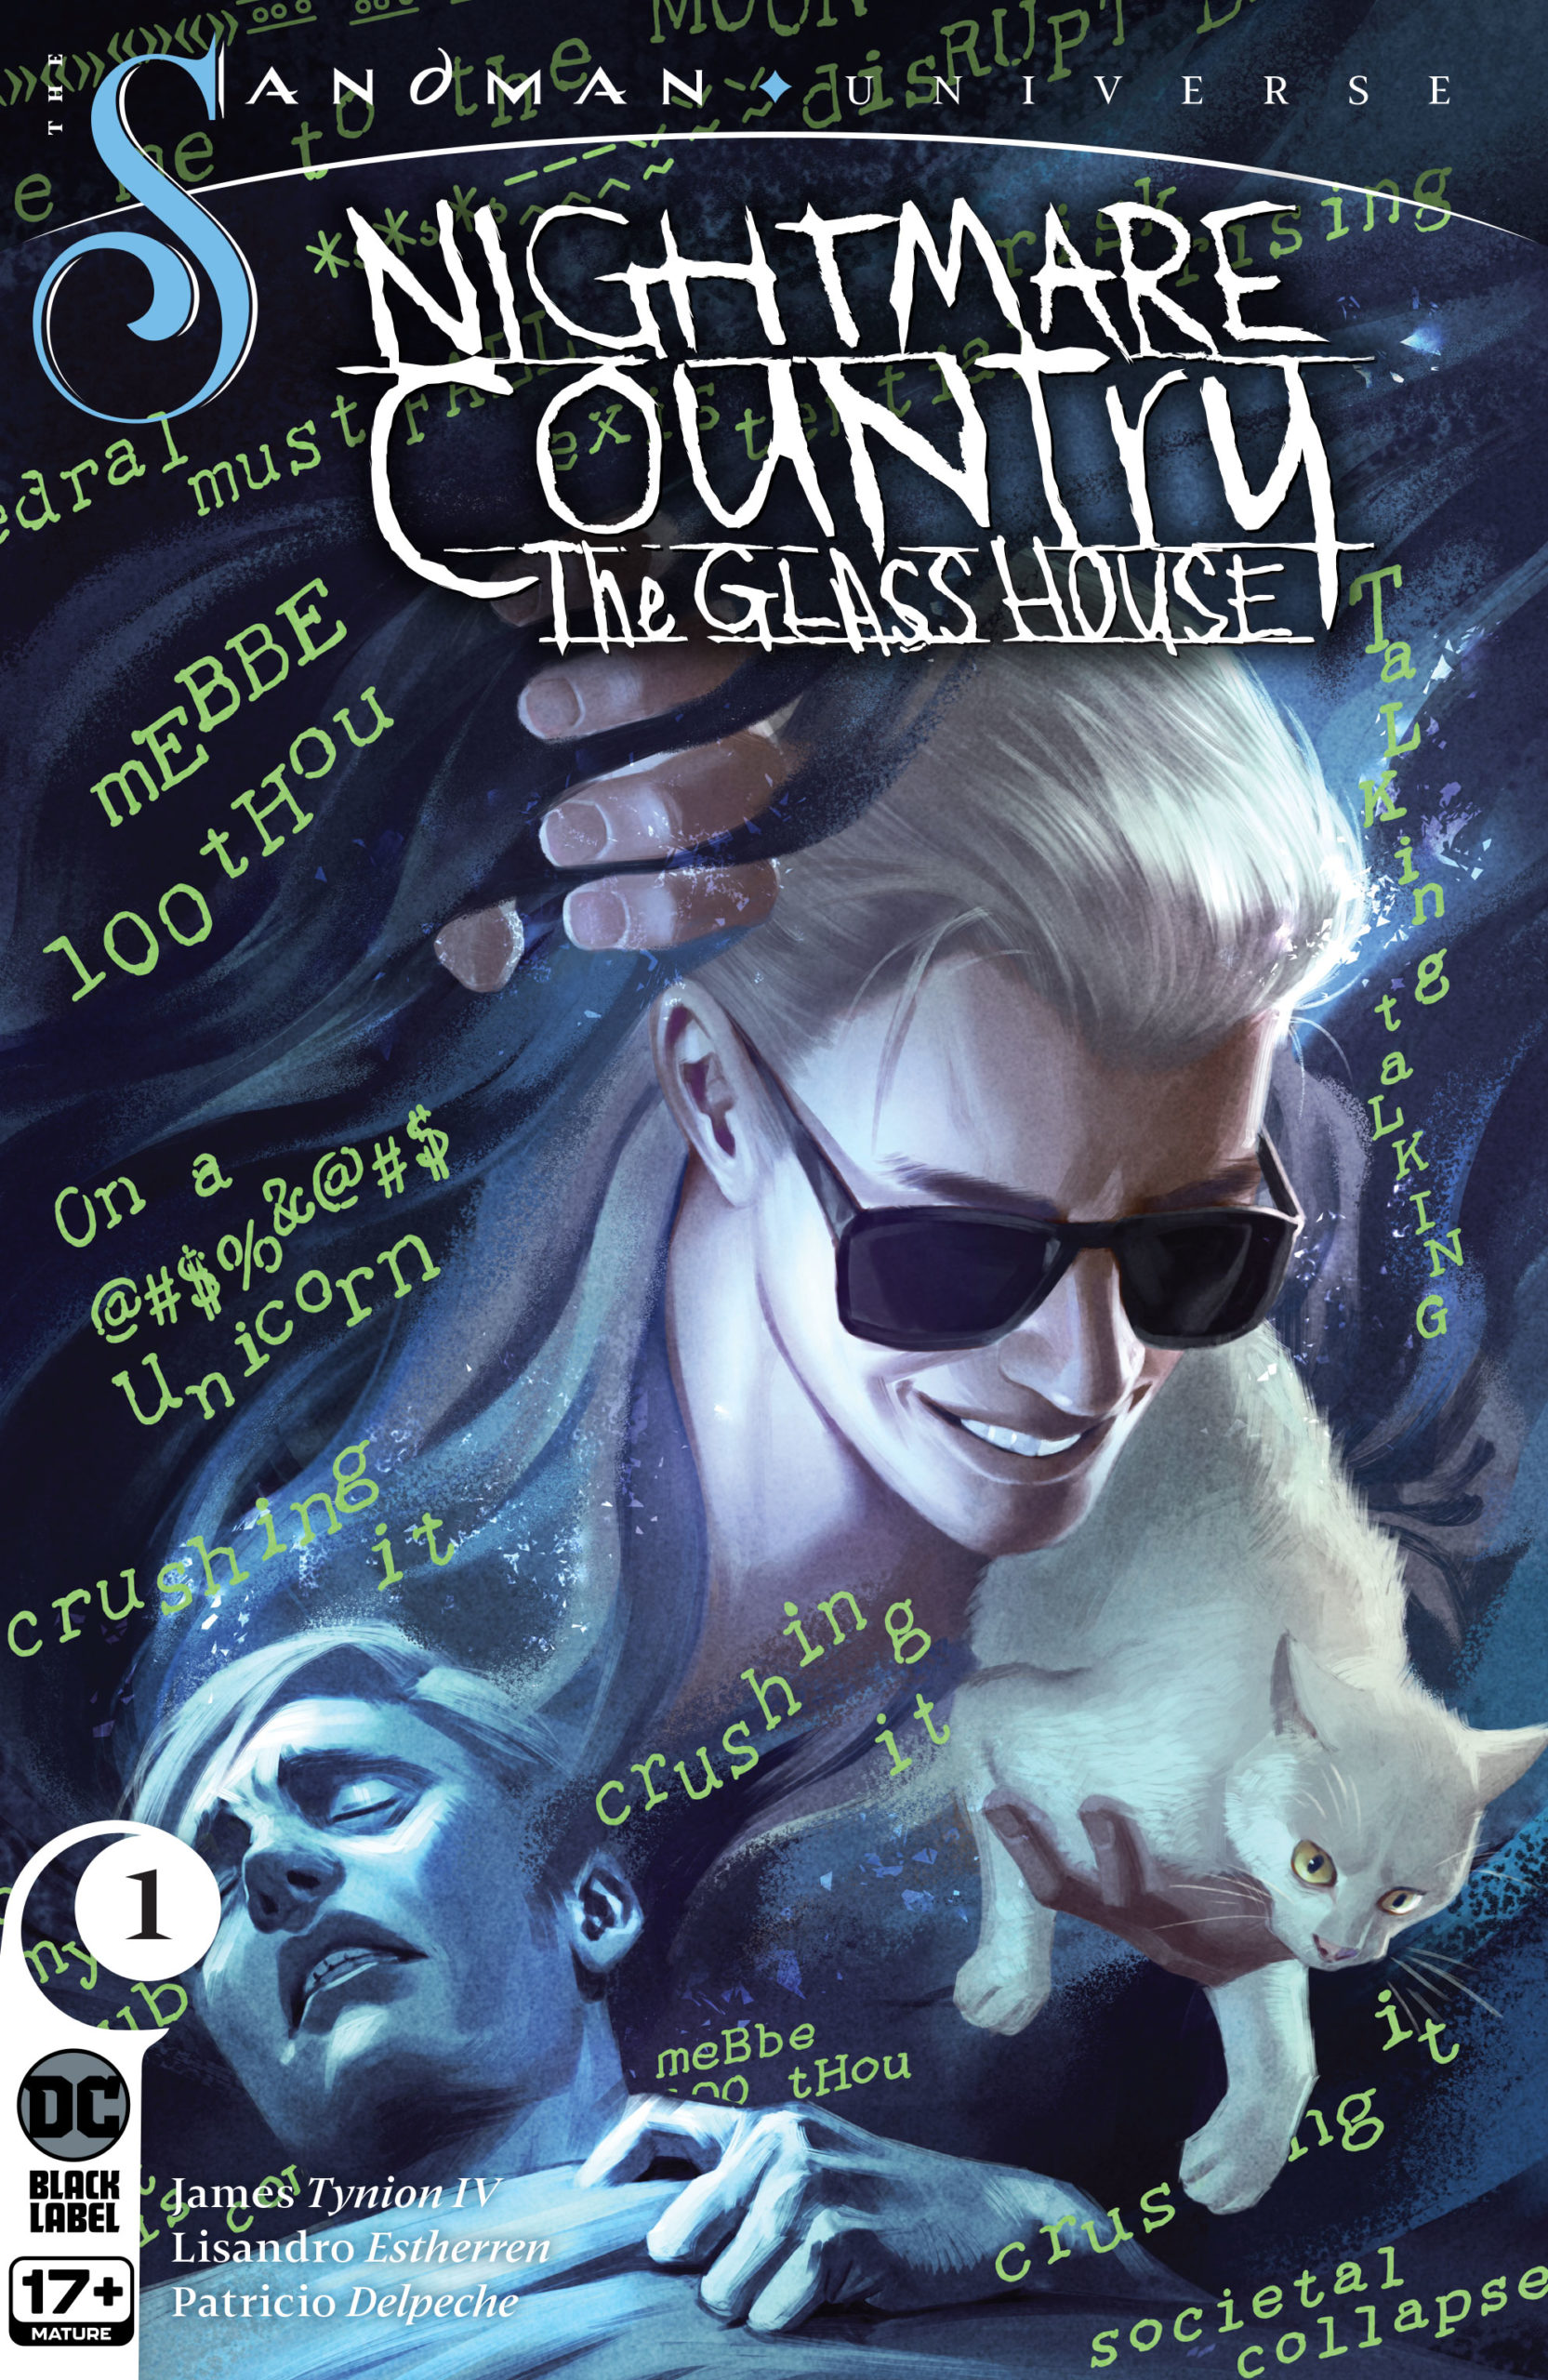 The Sandman Universe: Nightmare Country - The Glass House #1